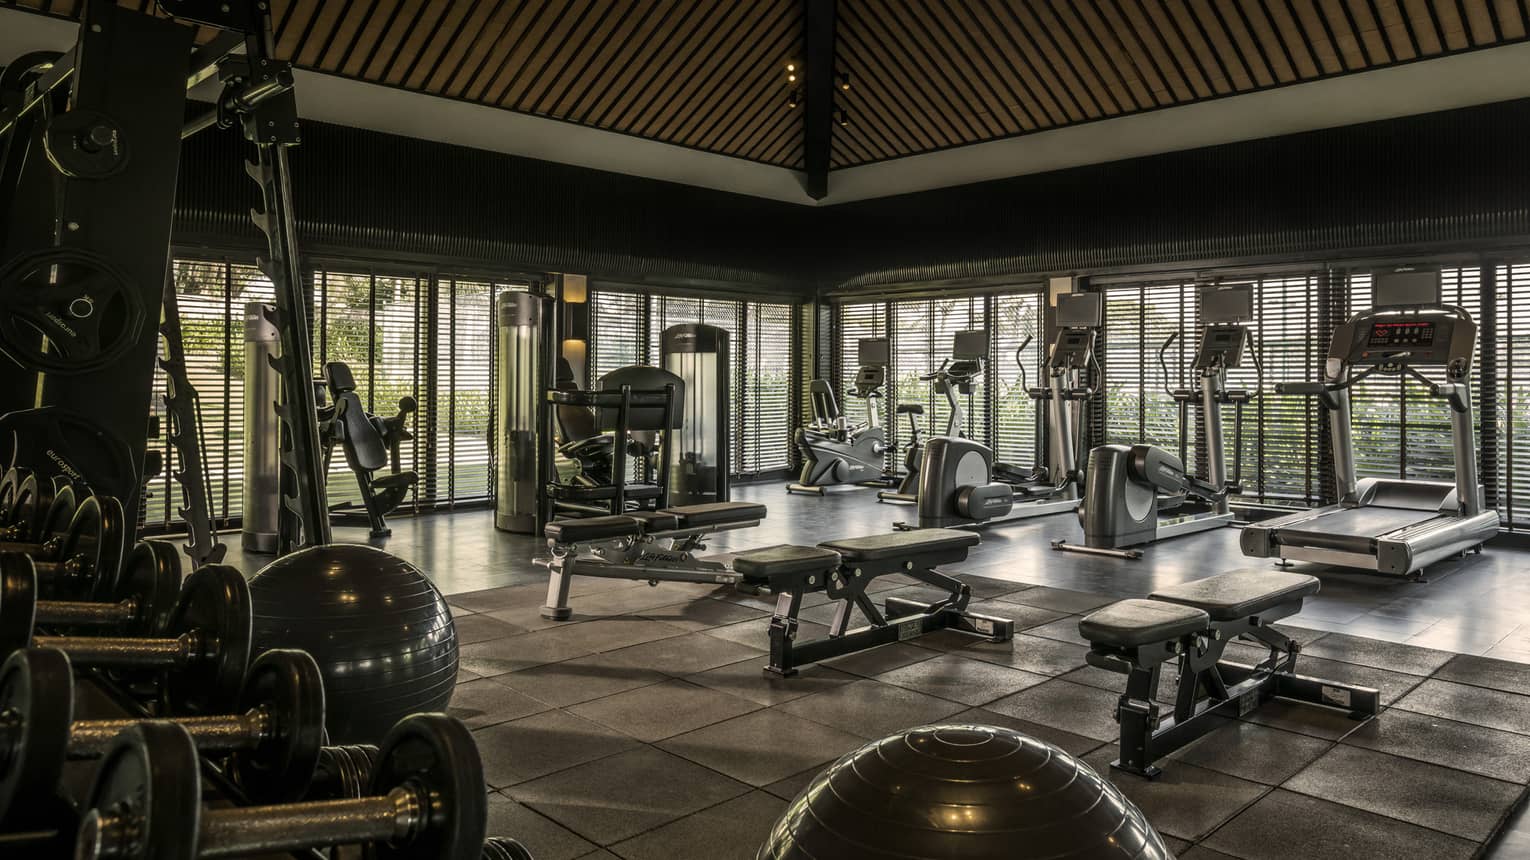 A spacious fitness center with various exercise equipment